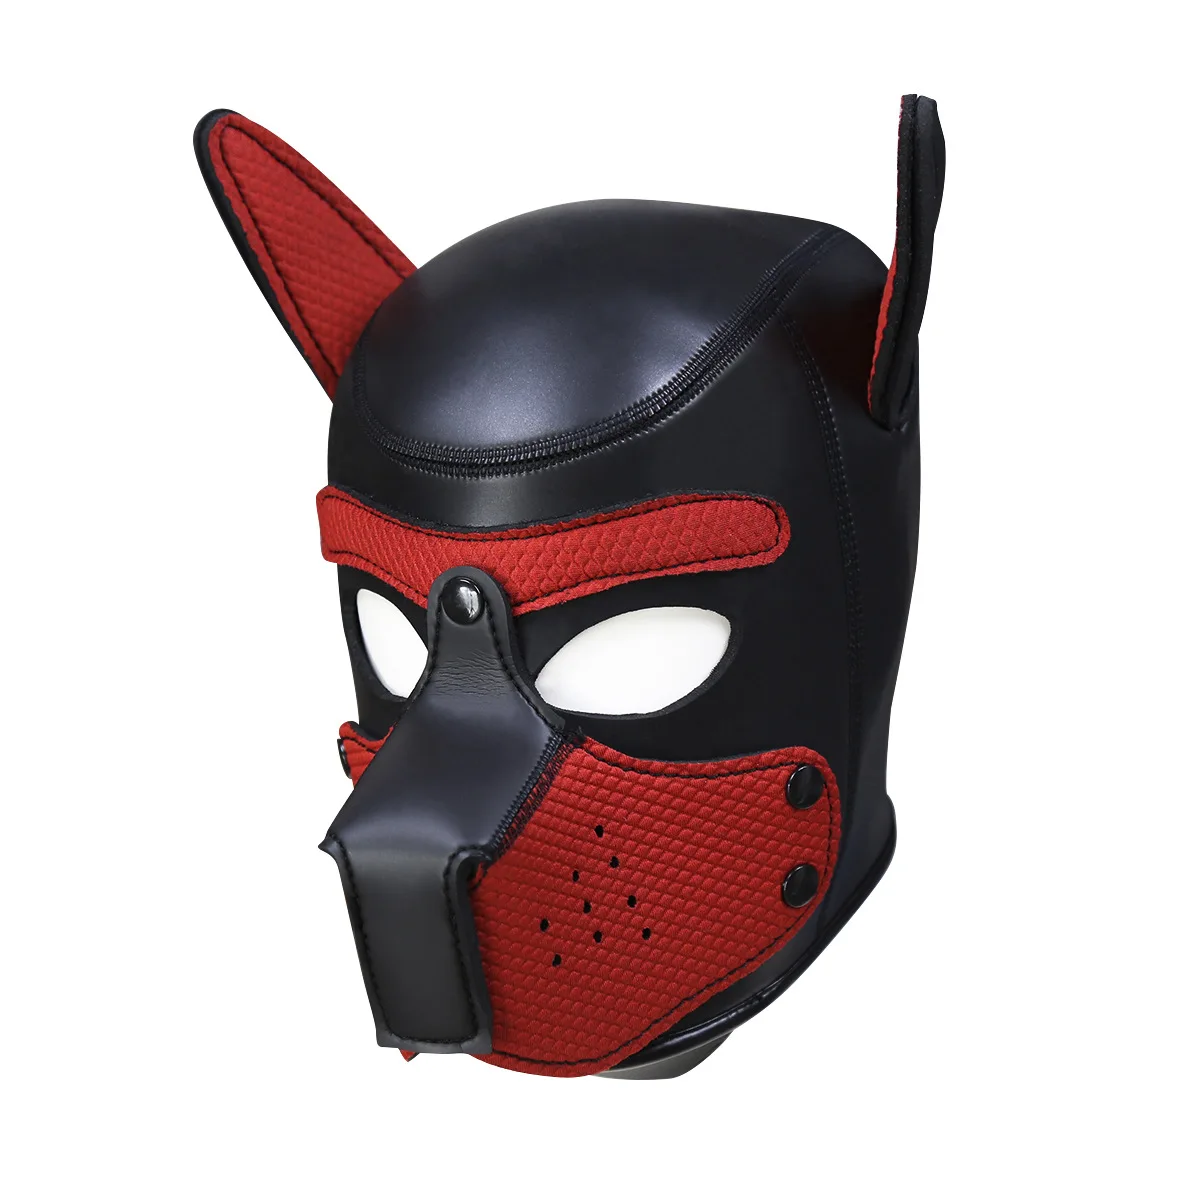 Brand New Fashion Padded Latex Rubber Role Play Dog Mask Puppy Cosplay Full Head with Ears 10 color Stage performance props Hot halloween outfits Cosplay Costumes